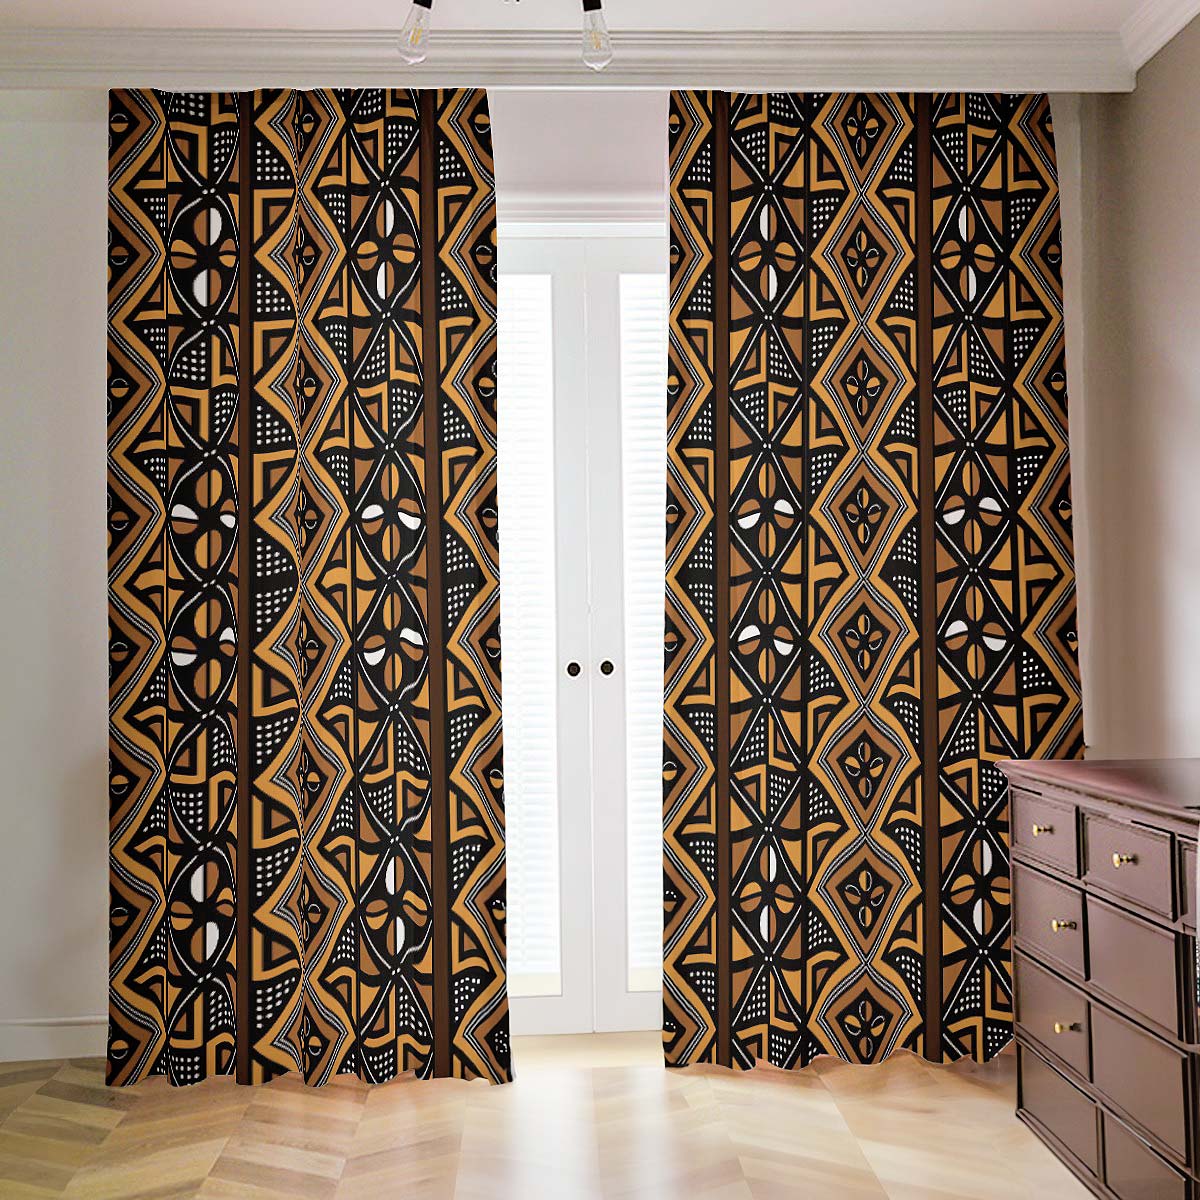 Mudcloth Curtains in Blackout African Print Brown - Bynelo